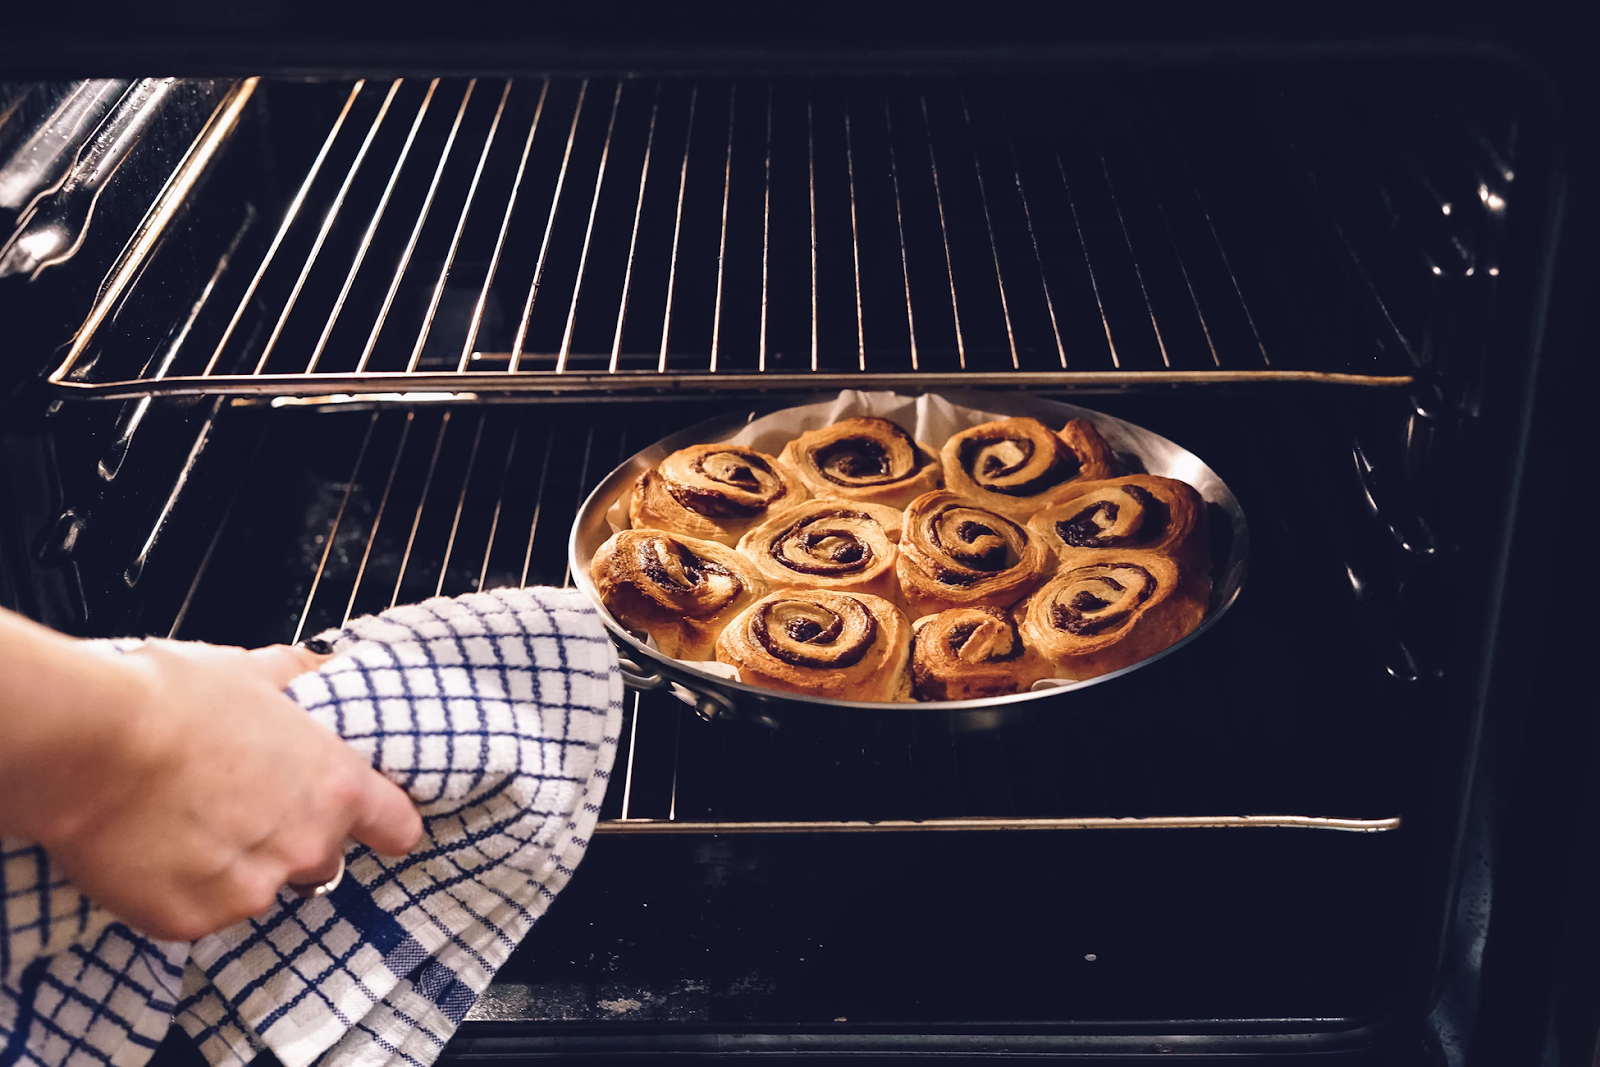 Factors You Need to Consider When Buying an Industrial Oven